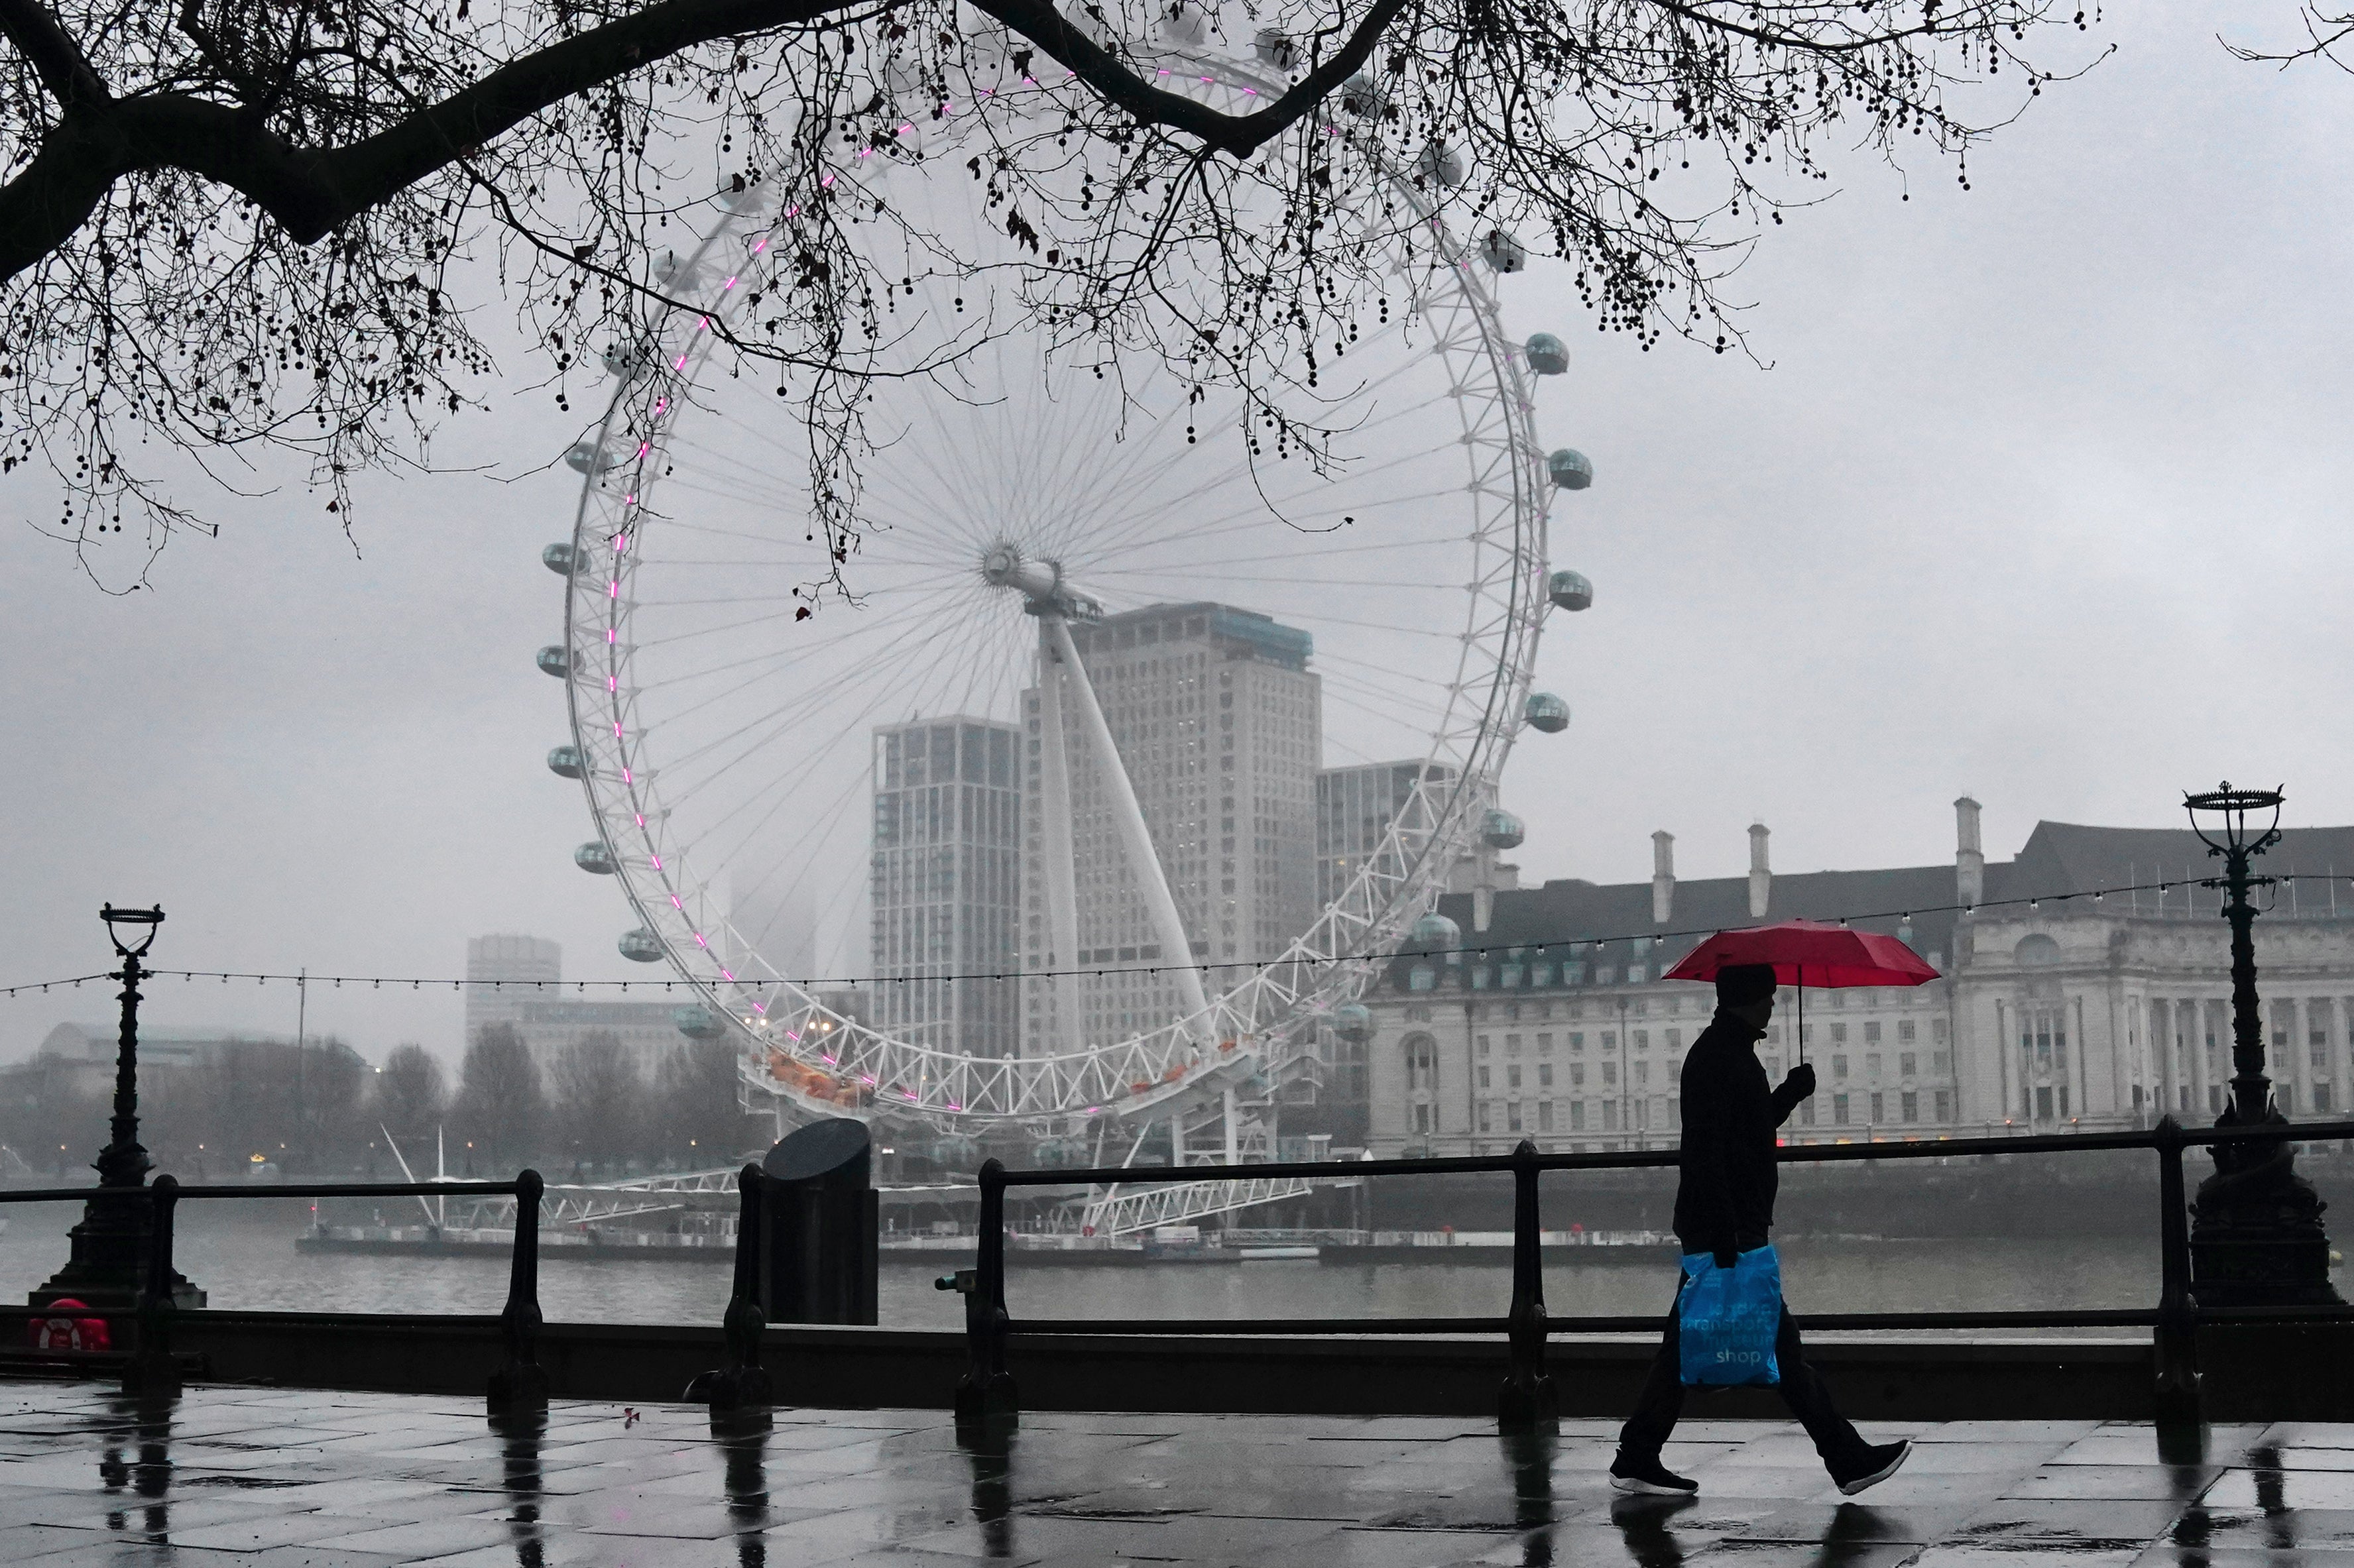 A man walks with an umbrella during wet weather on the Embankment in Westminster, on Tuesday 11 January 2022